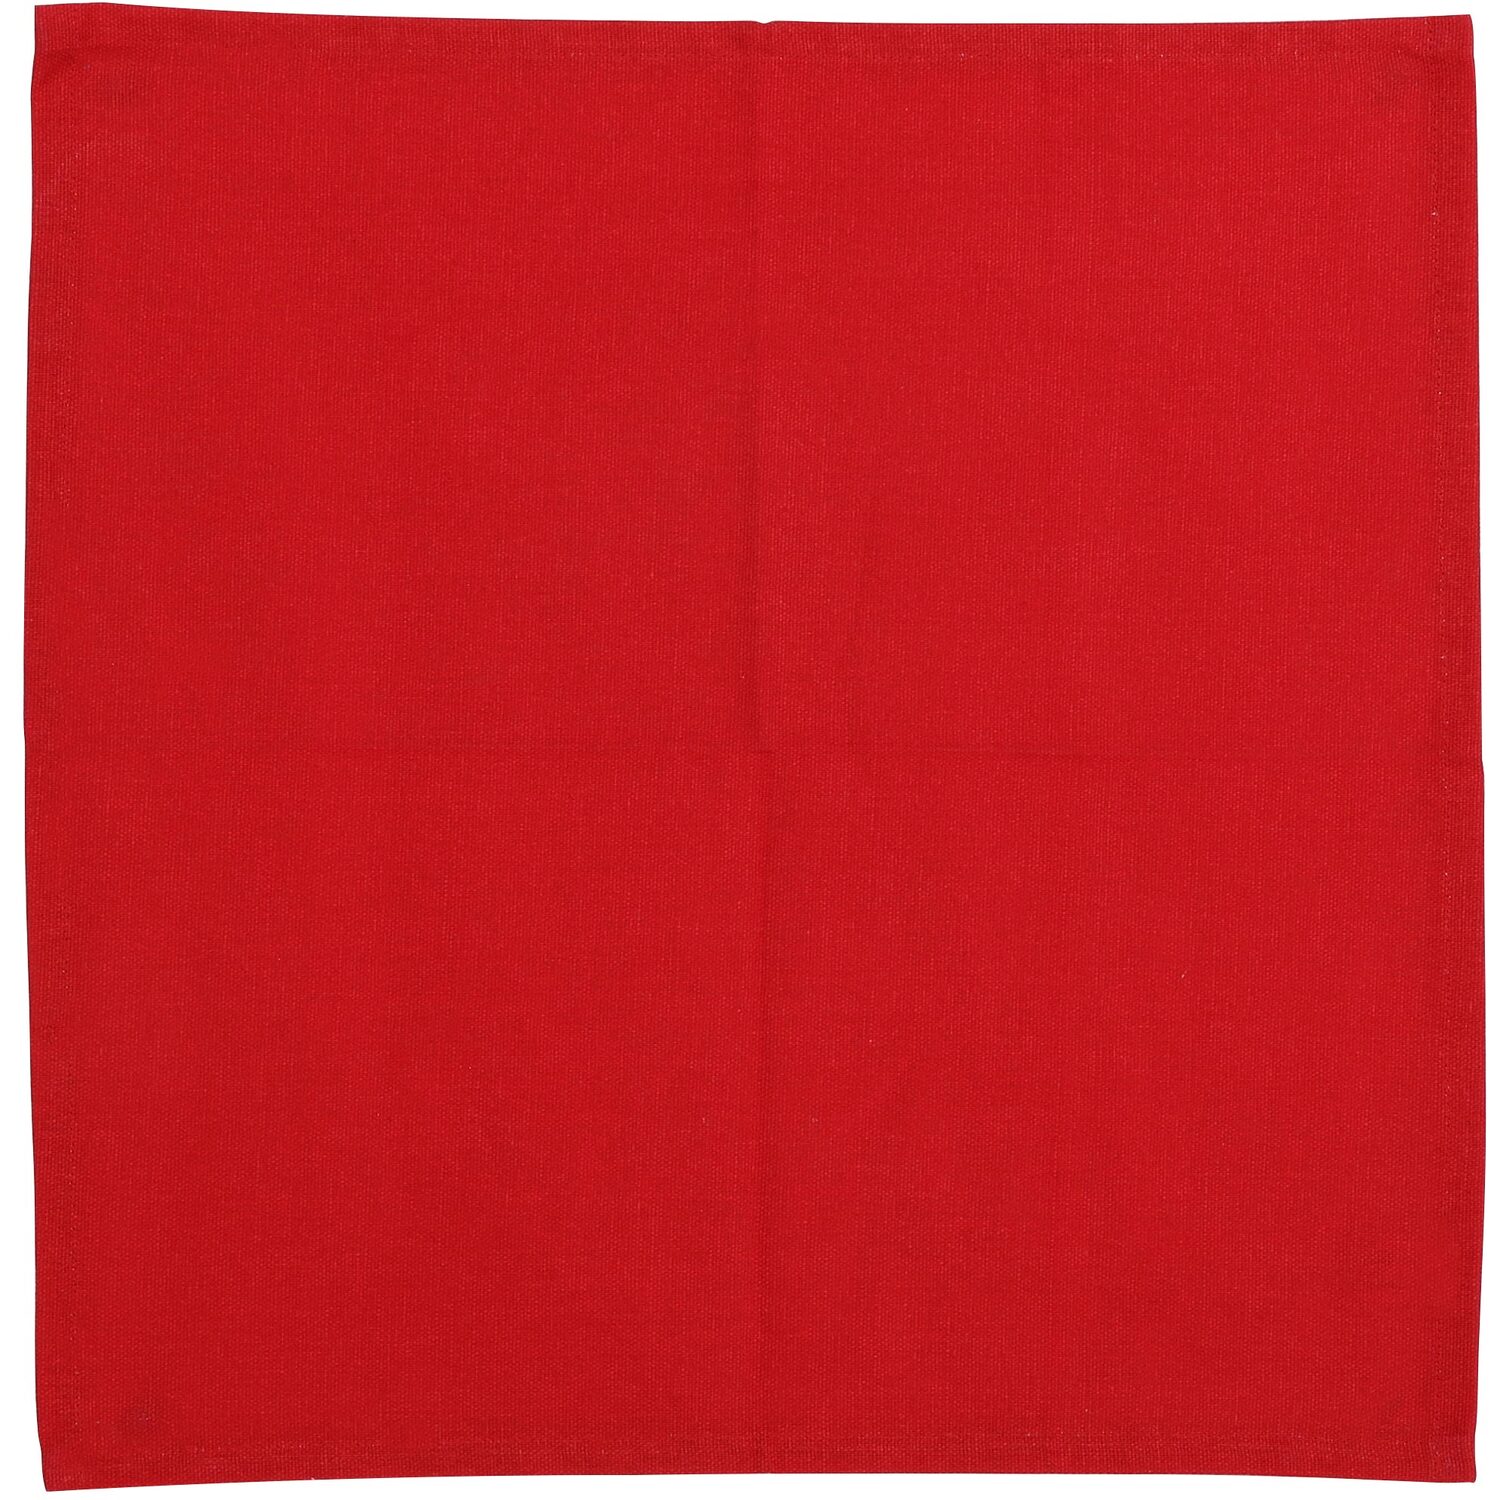 Pack of 2 Strawberry Napkins - Red Image 7